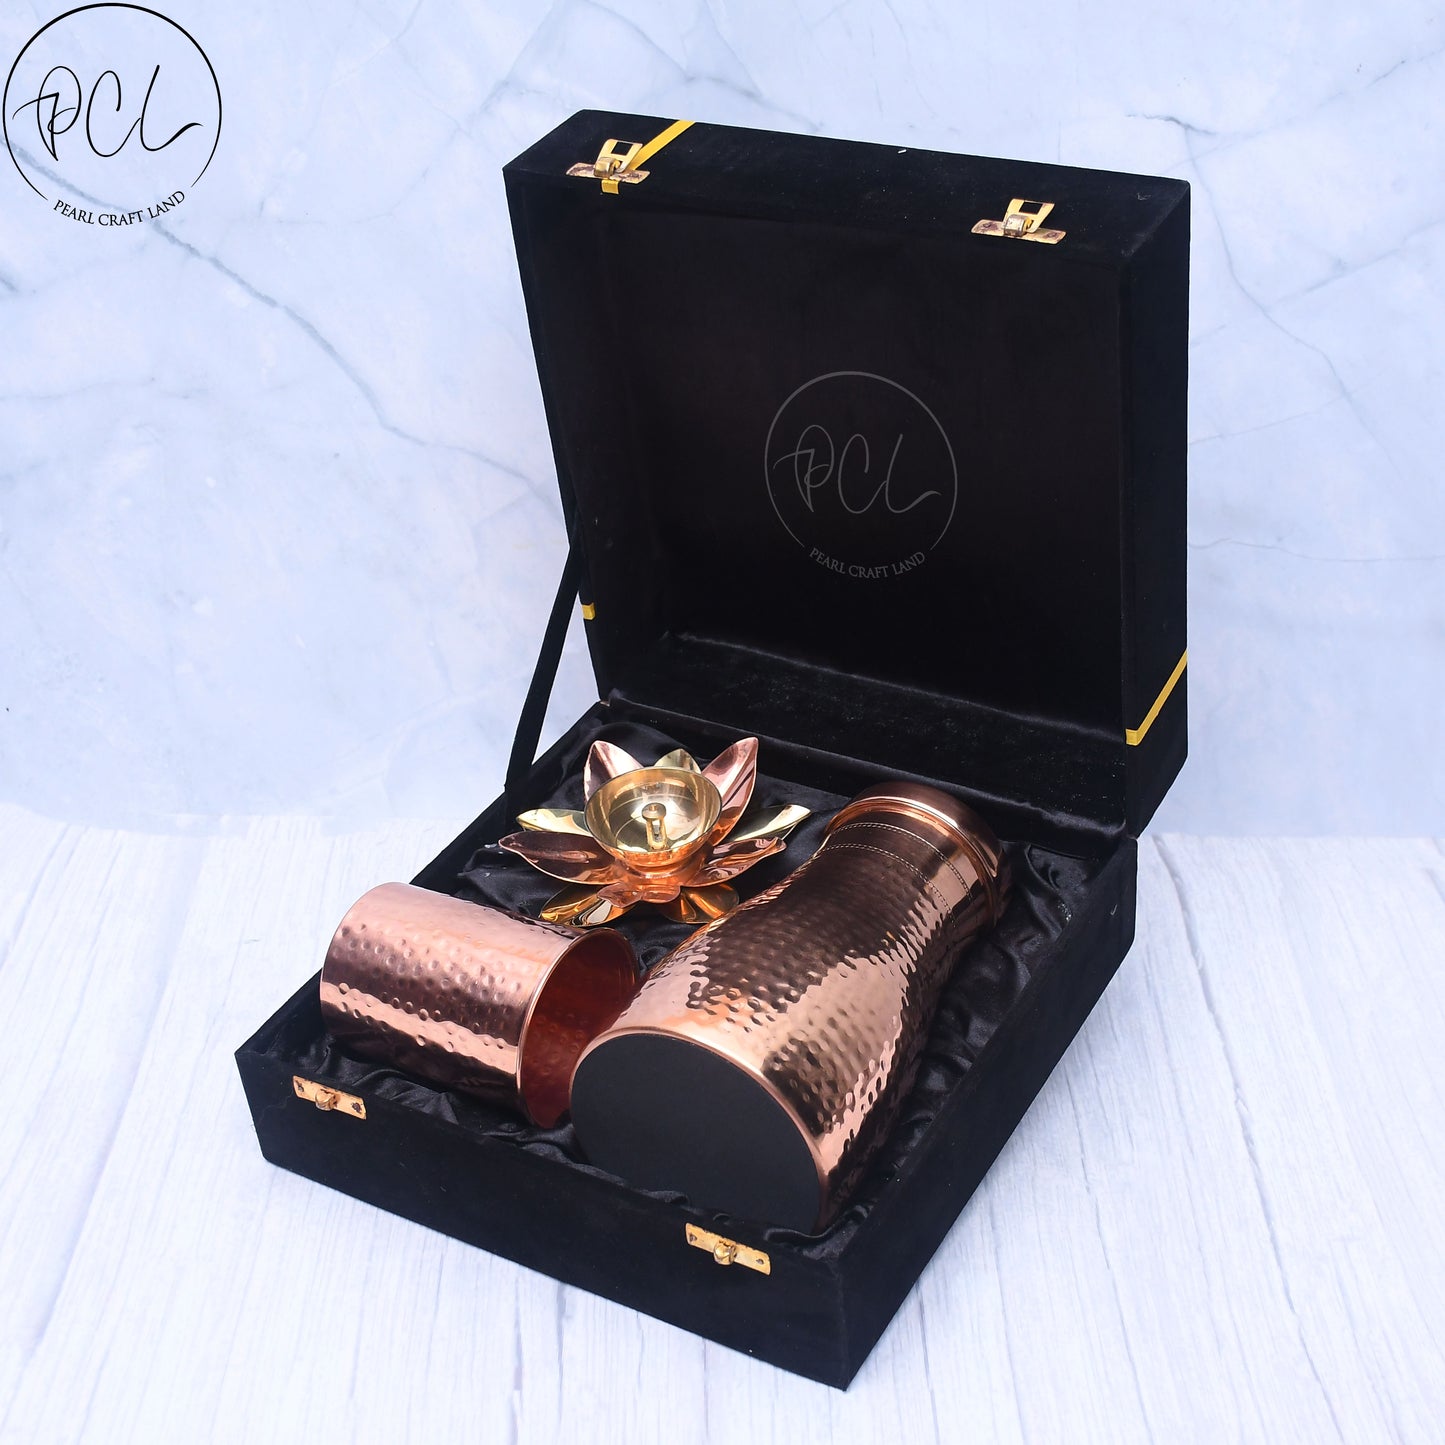 Exclusive Combo of Copper Bedroom Jar with Glass and Pooja Lotus Diya with Royal Gifting Box